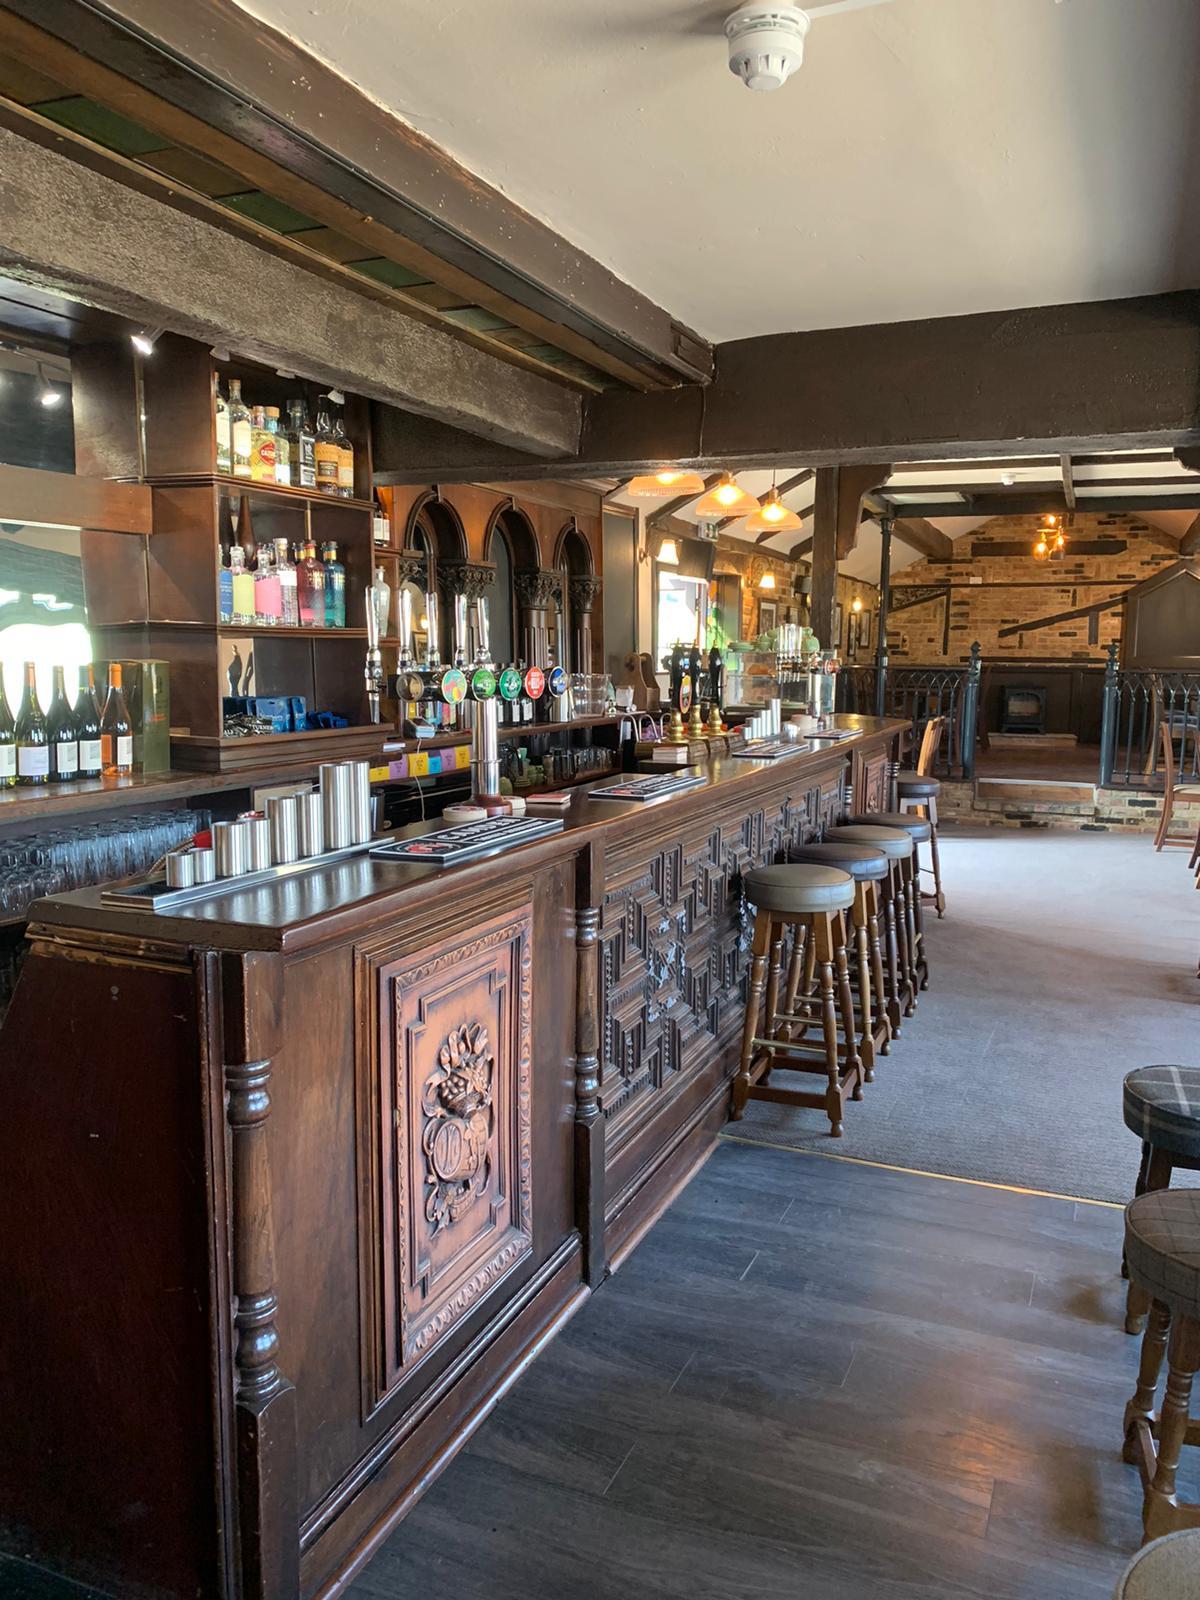 An inside look at the pub